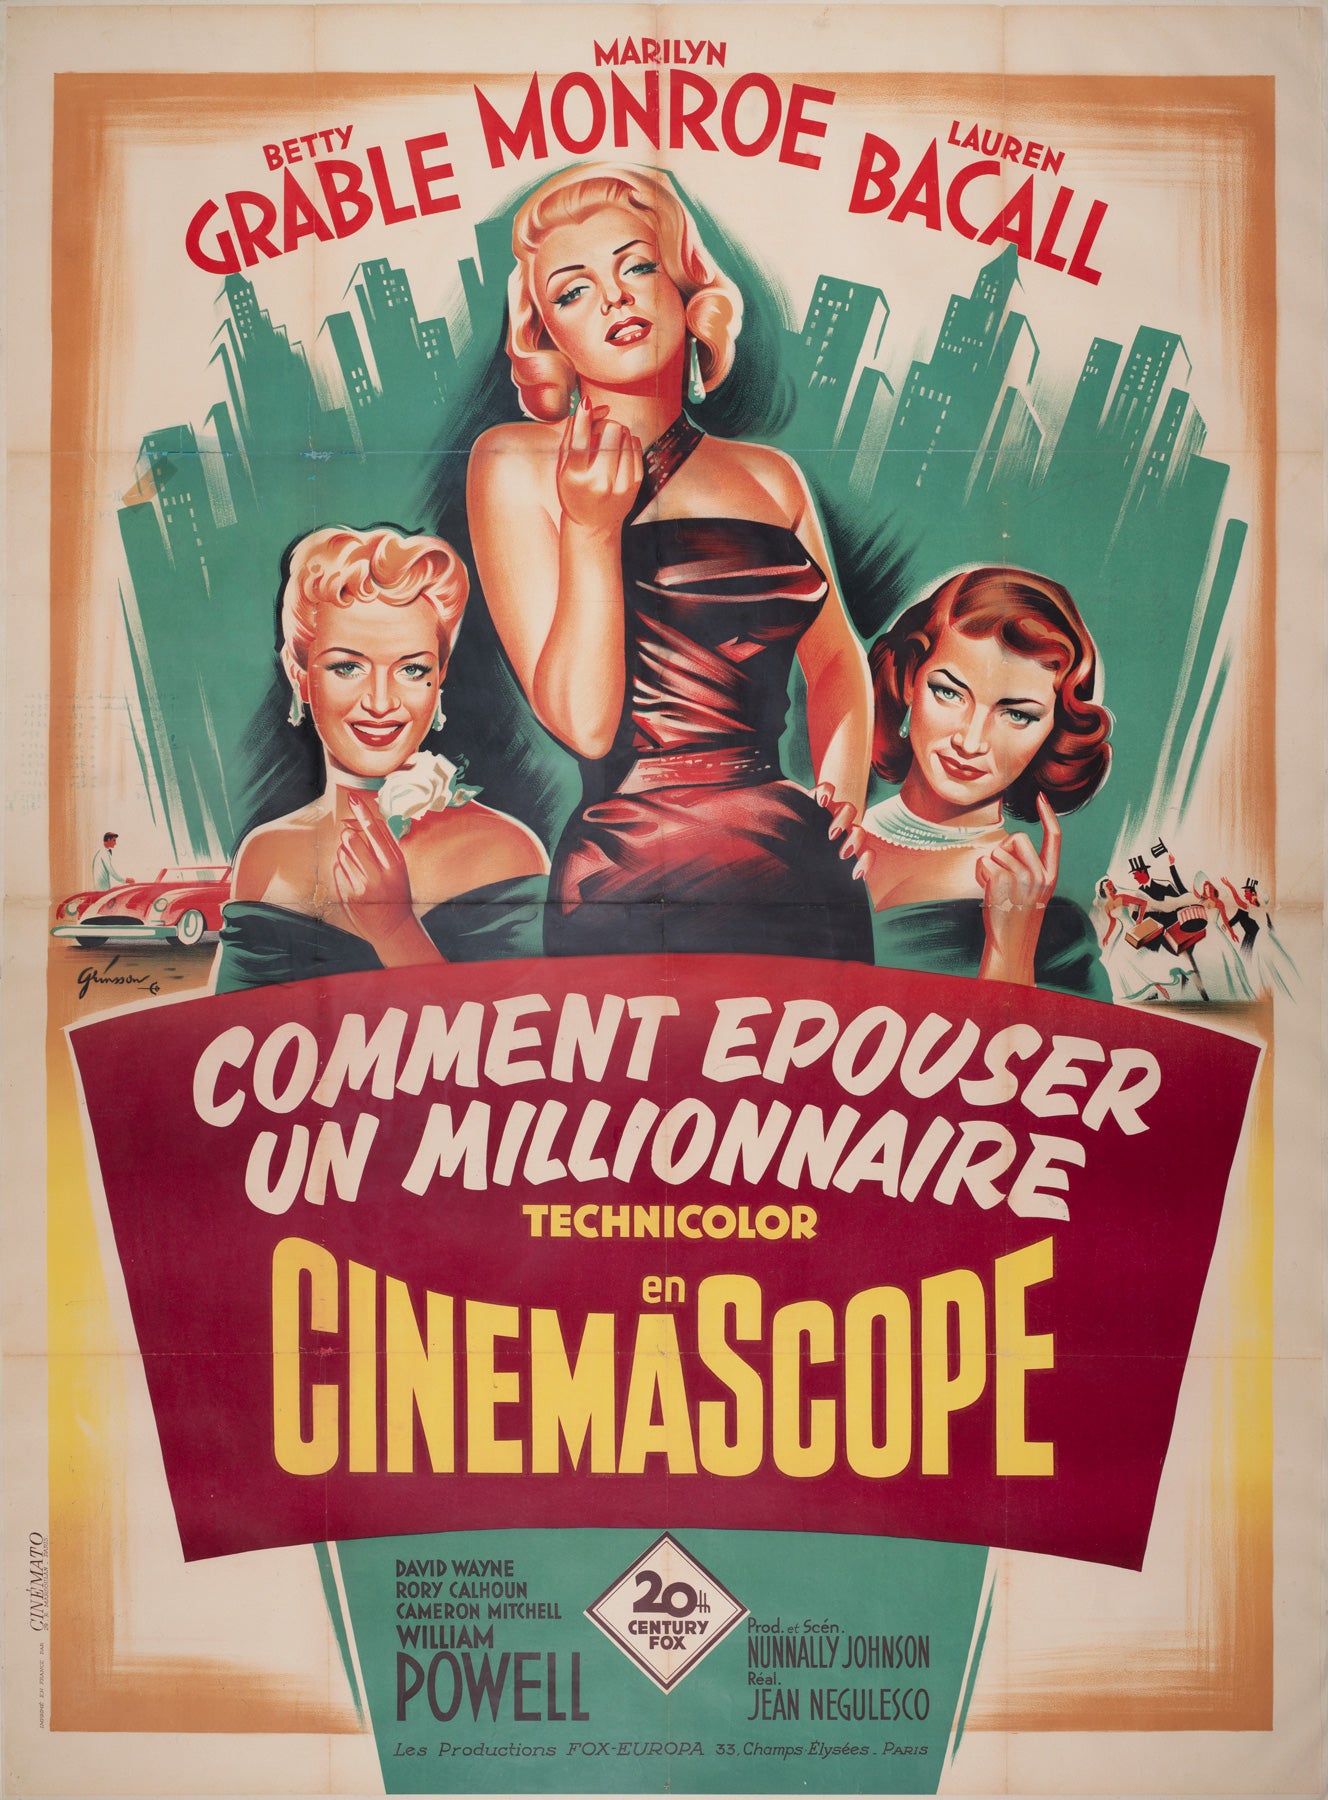 How to Marry a Millionnaire 1953 French Grande Film Movie Poster, Boris Grinsson